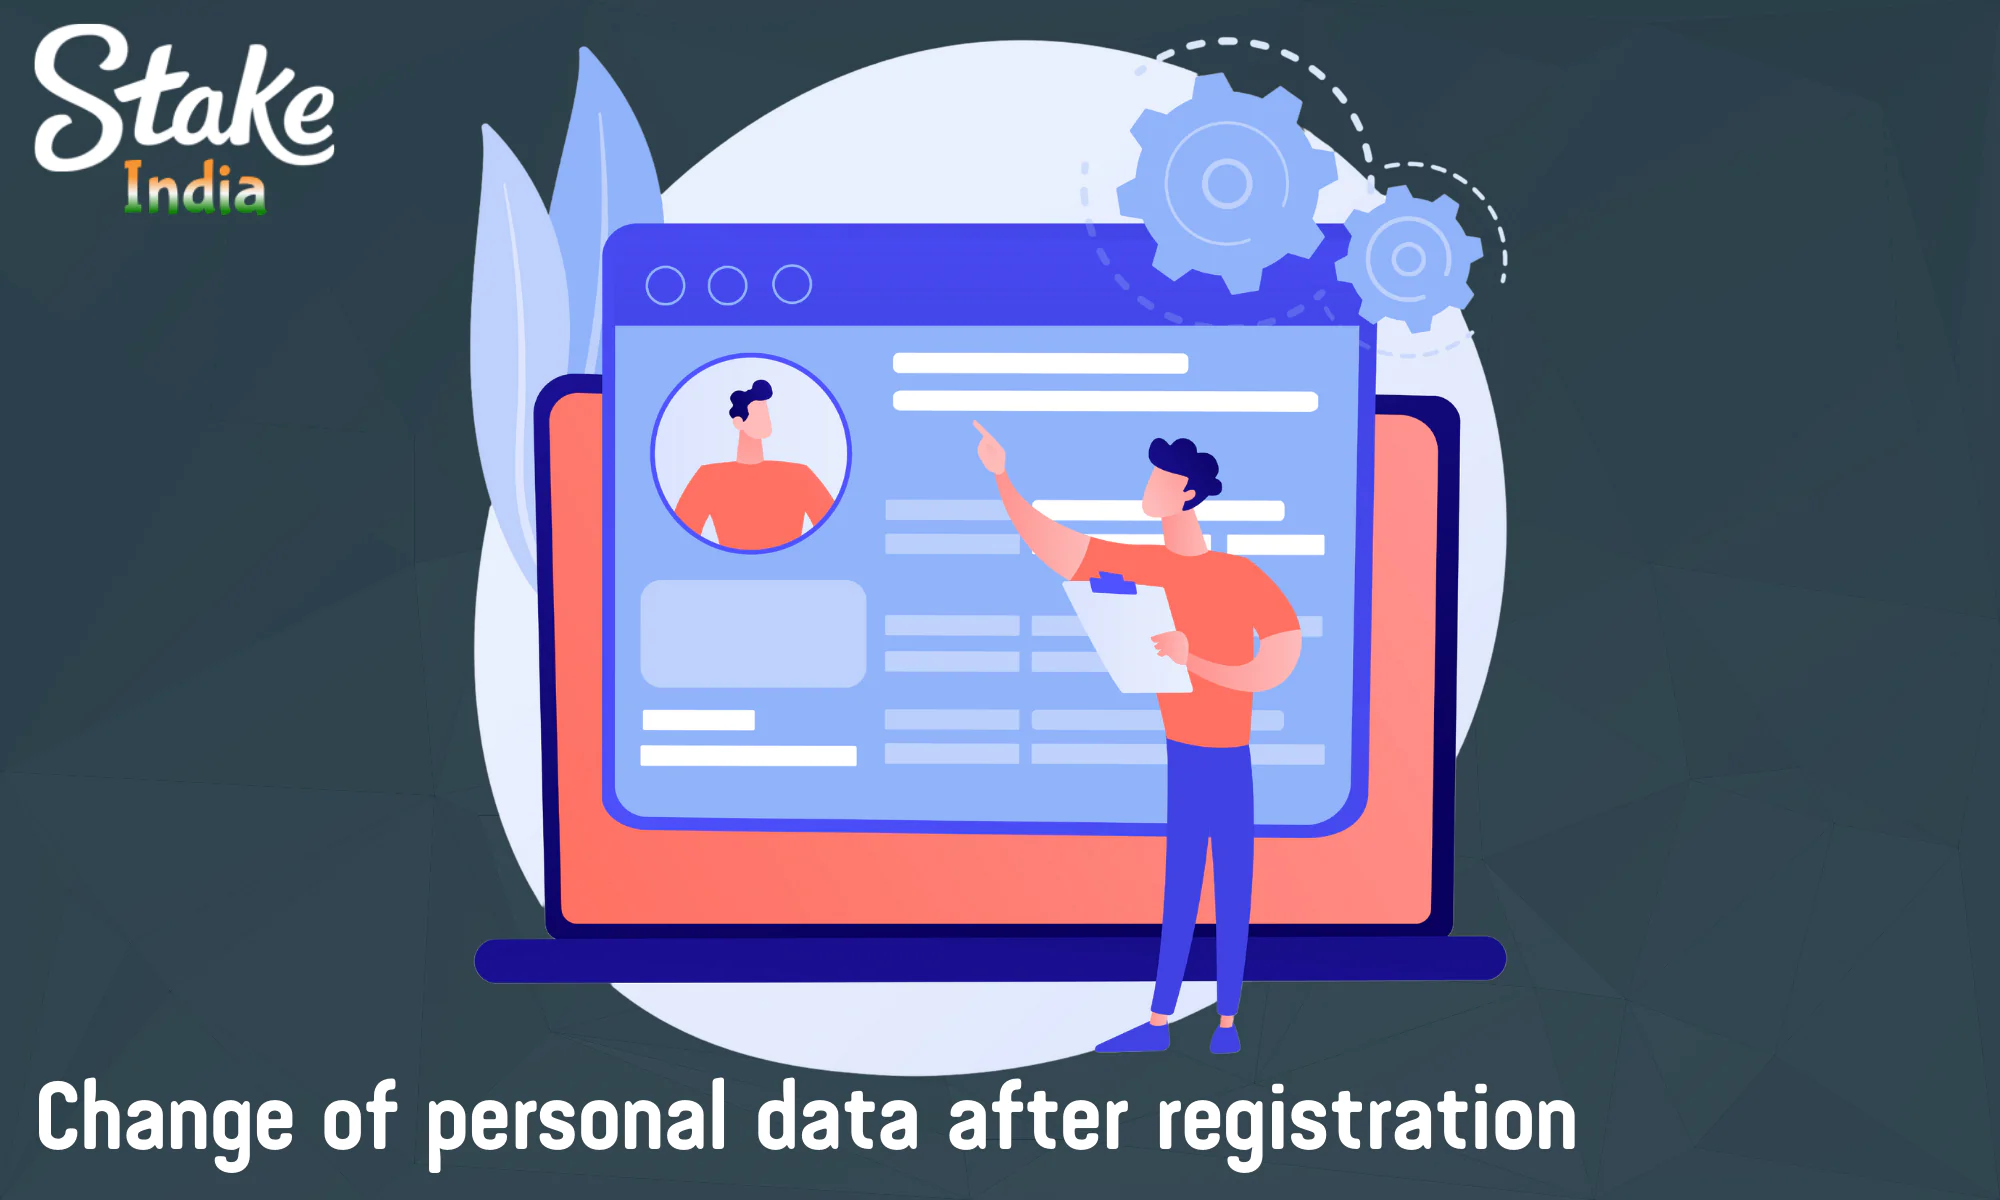 What personal data can be changed after registration with Stake